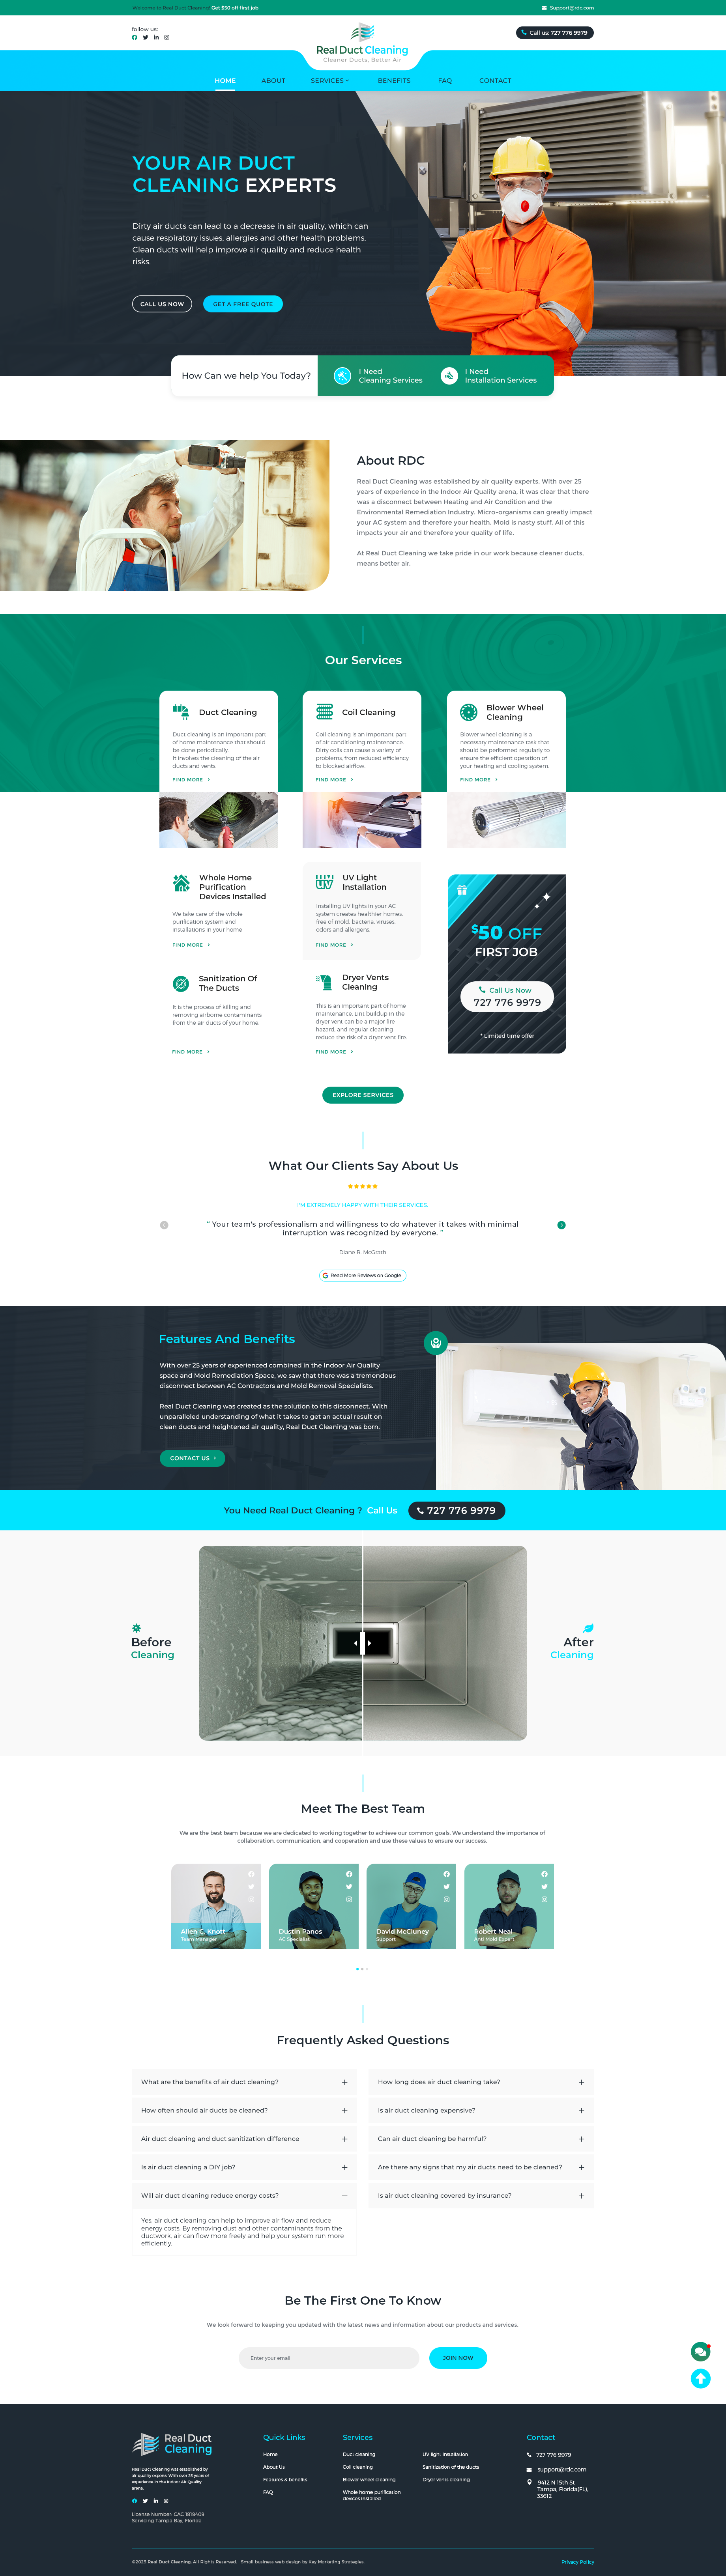 duct cleaning web design